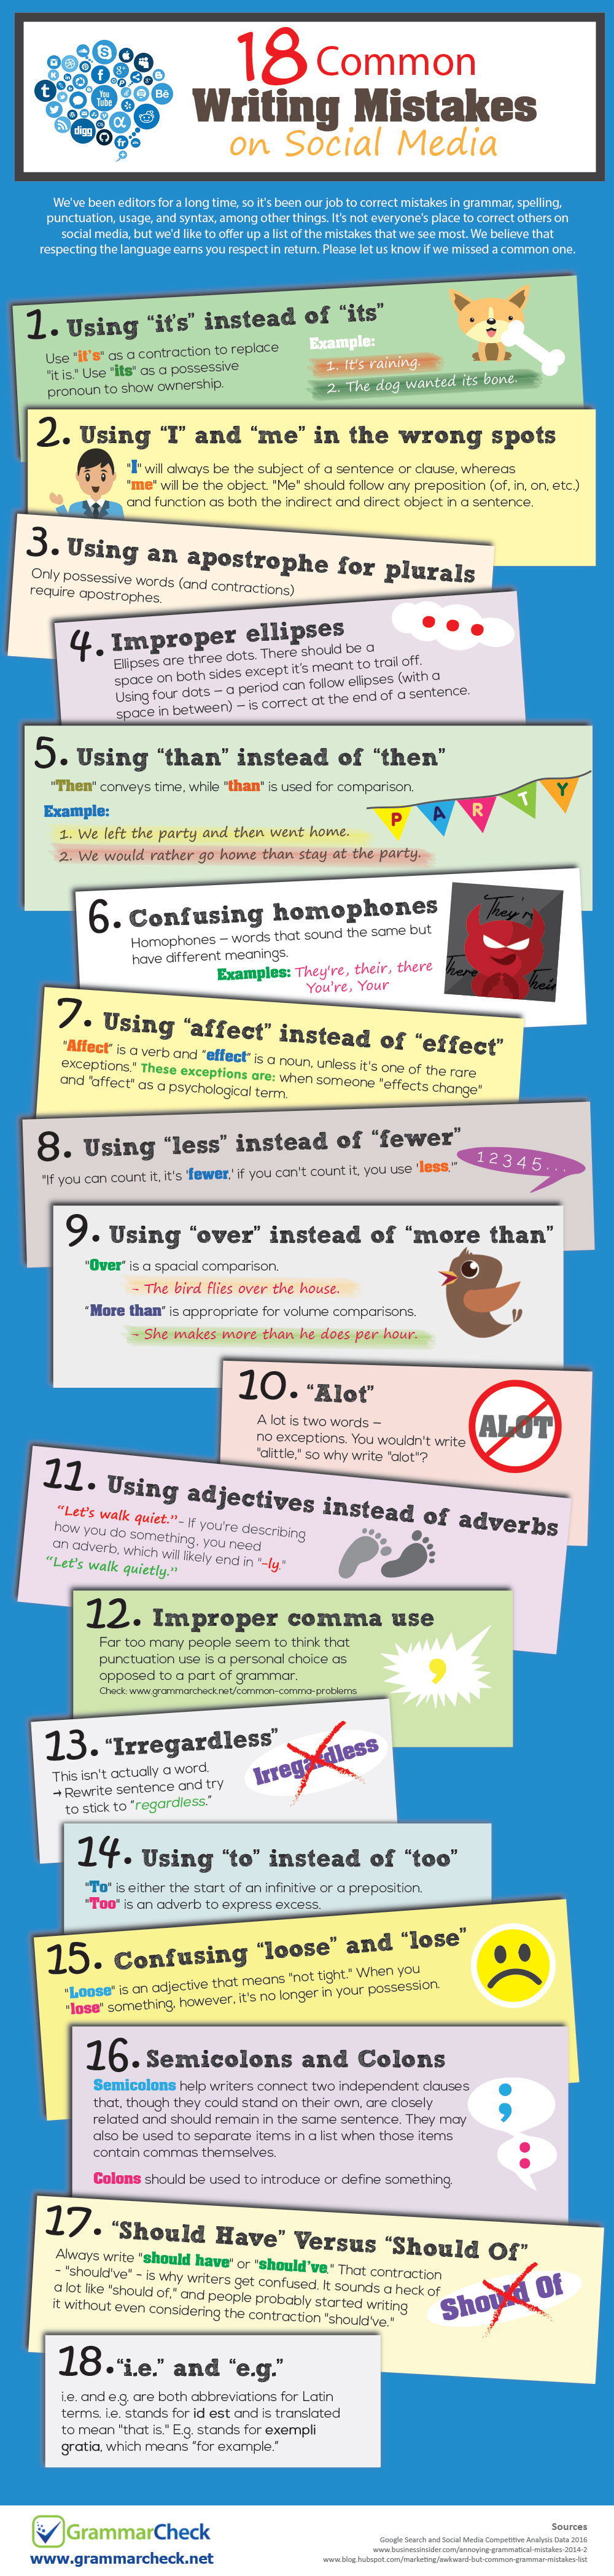 18 Common Writing Mistakes on Social Media (Infographic)